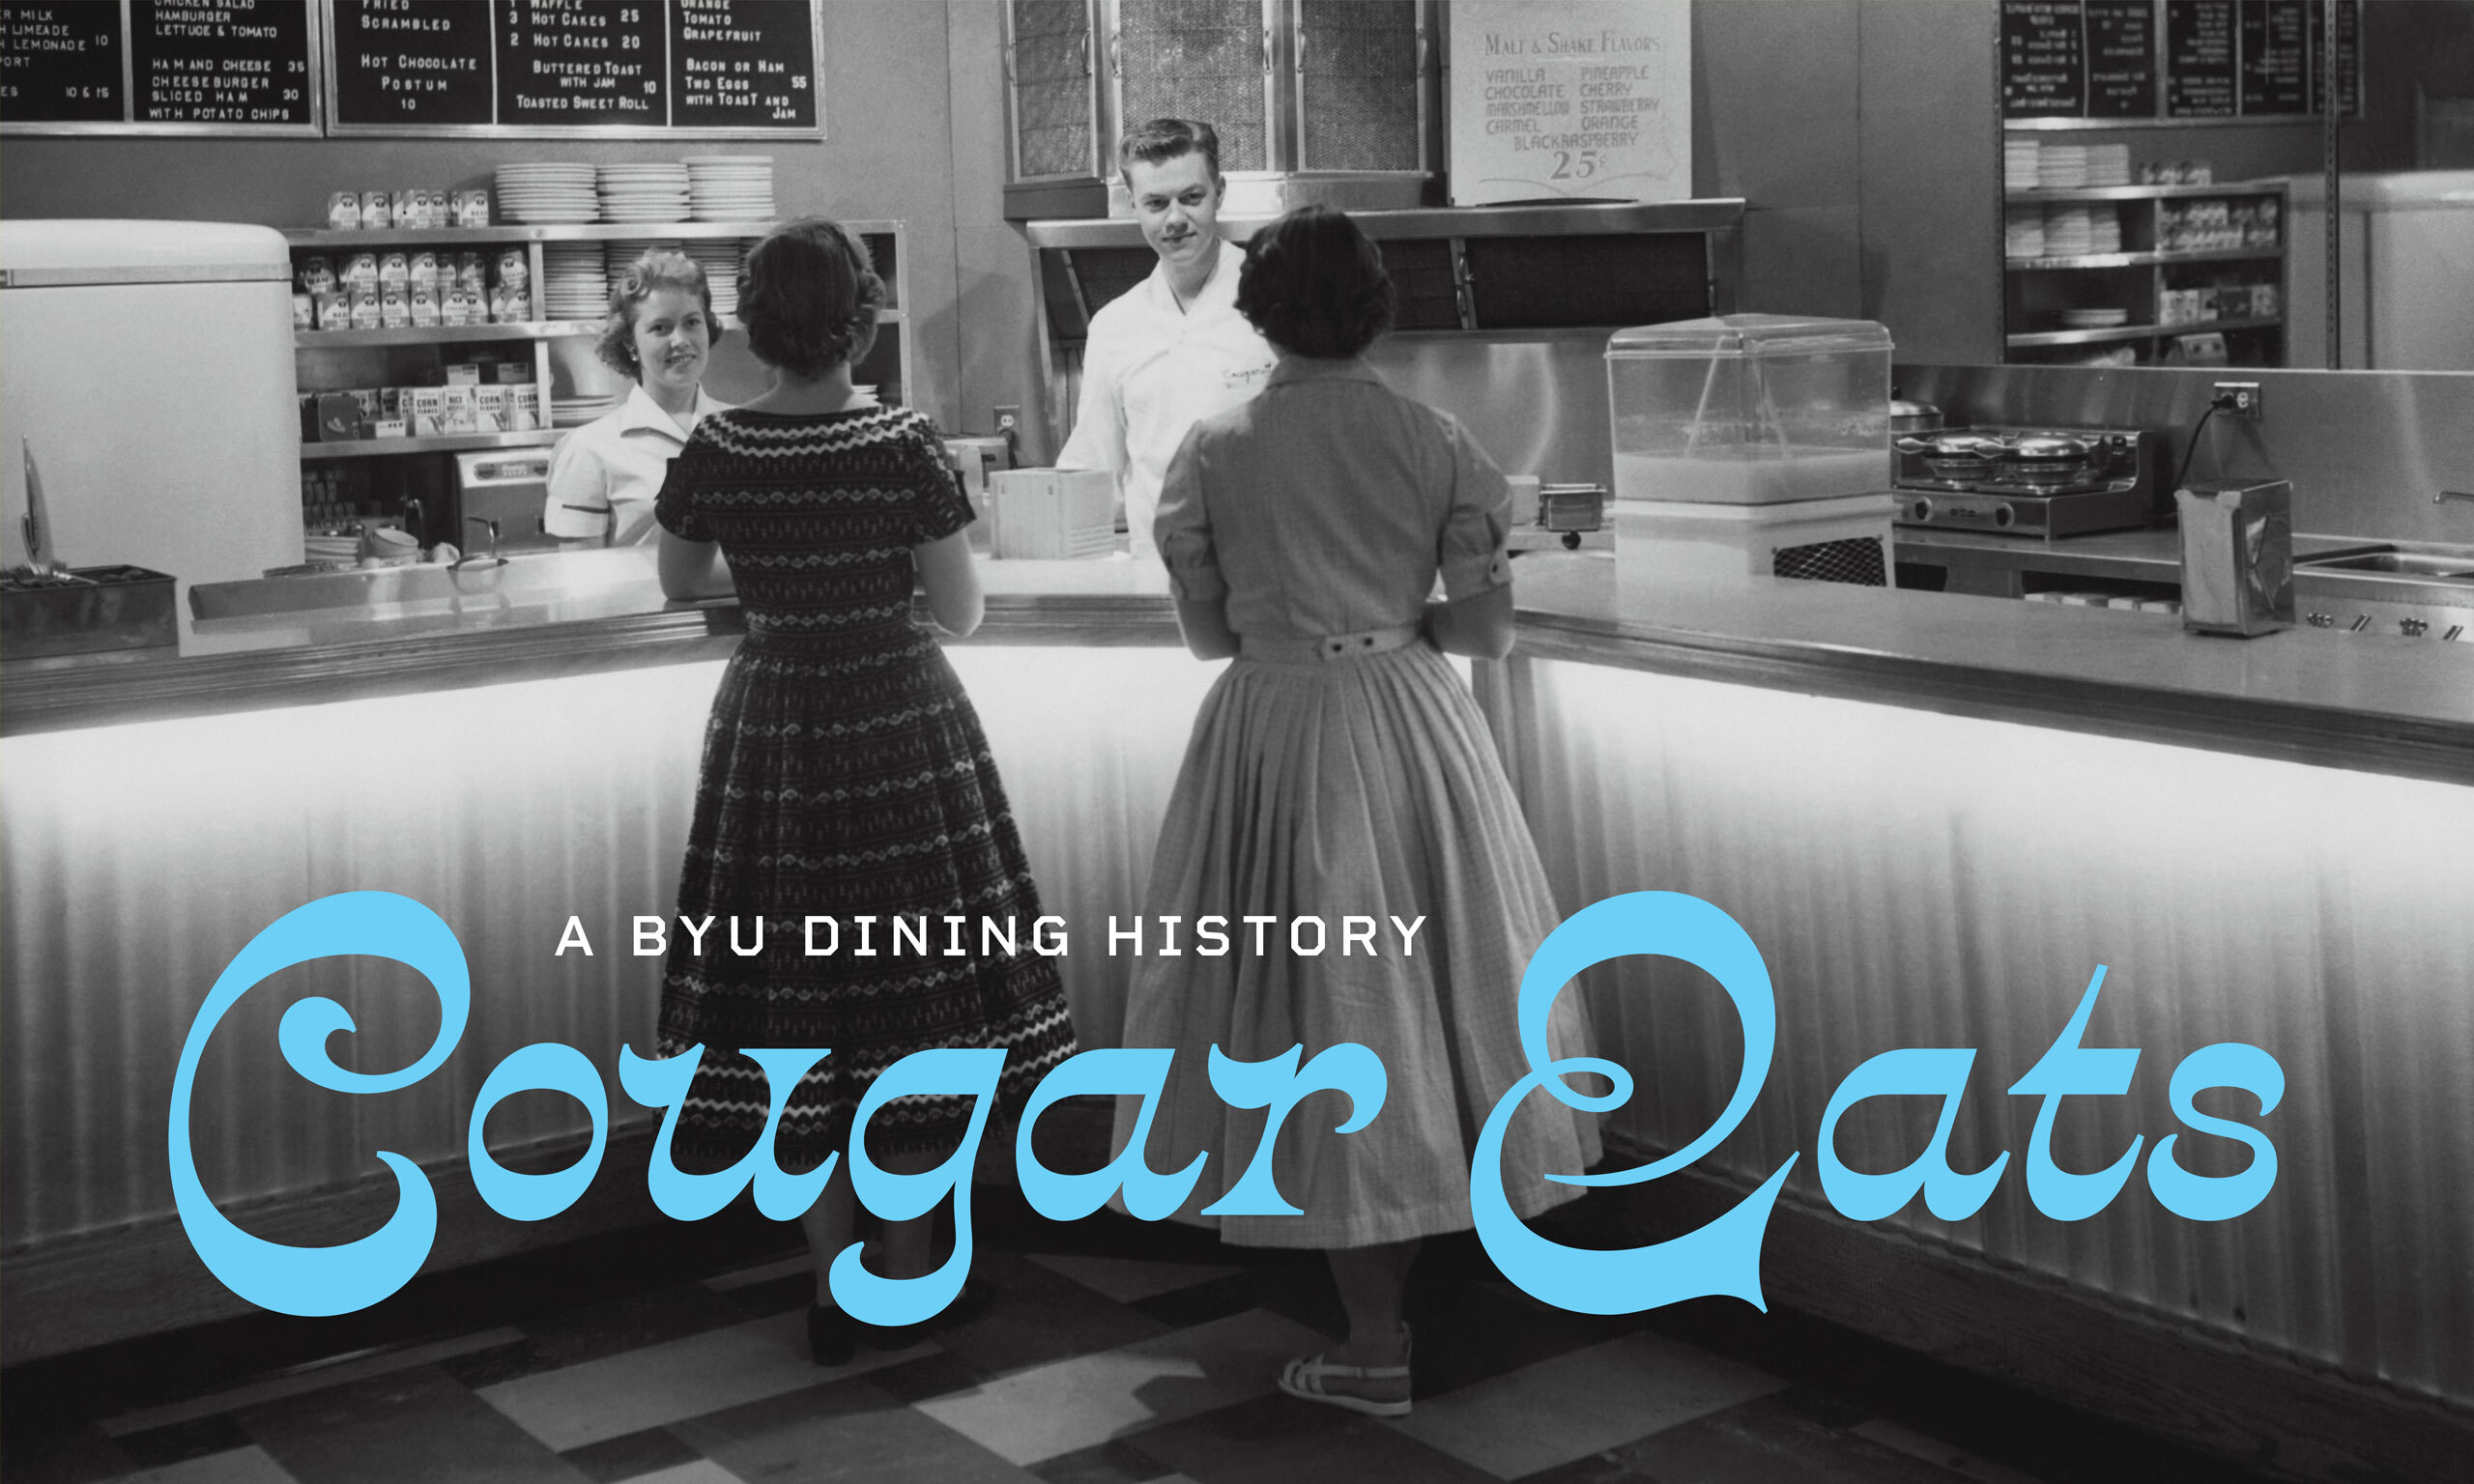 A black-and-white image of two women eating with blue text over top that reds Cougar Eats.